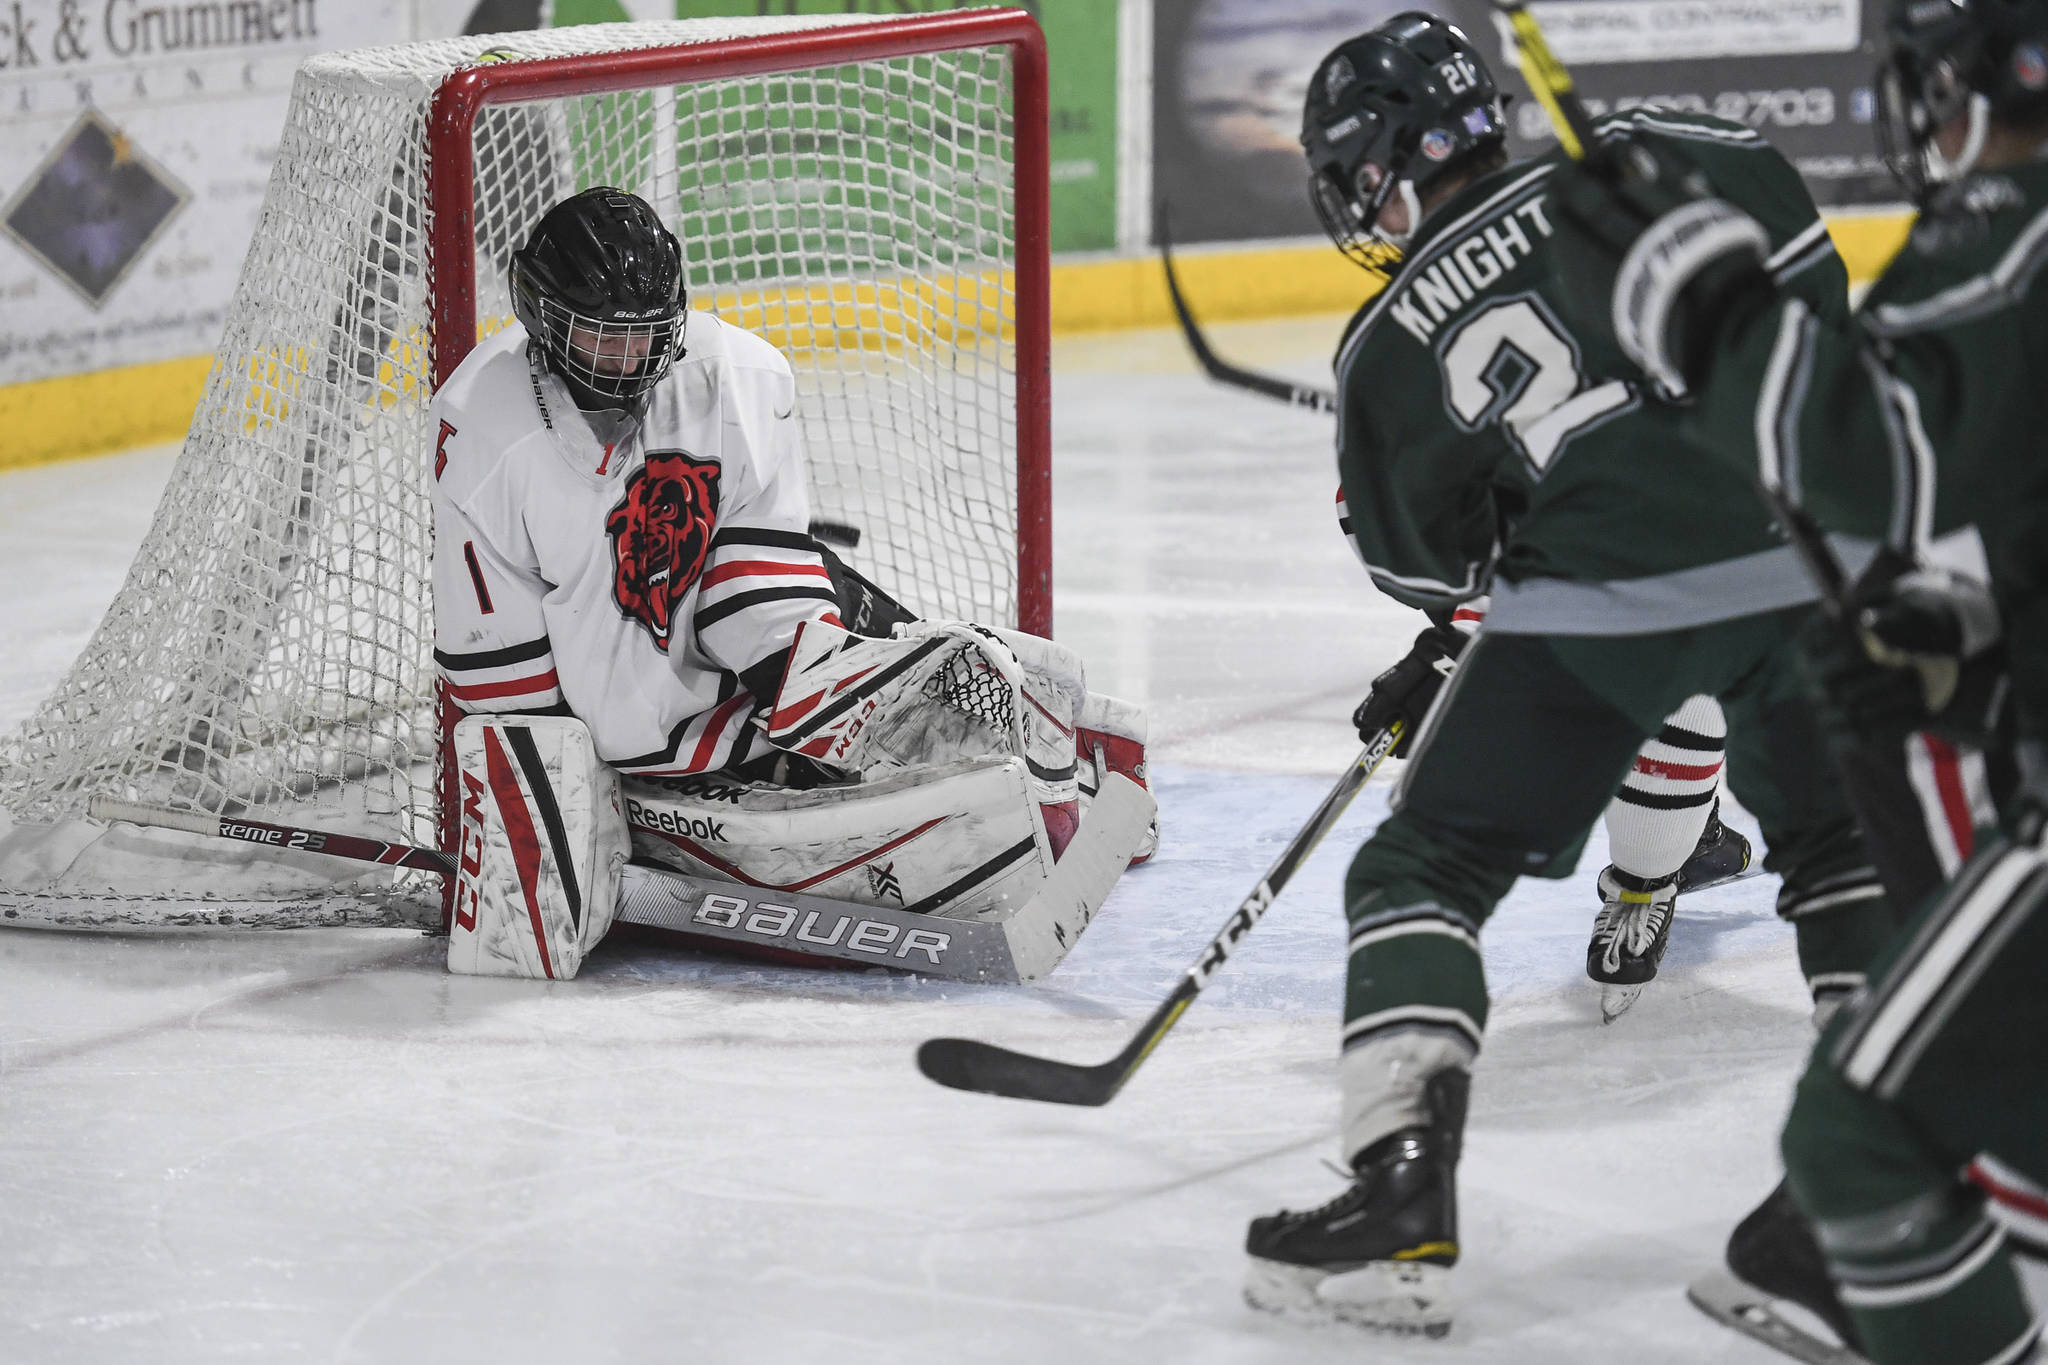 Colony’s Jacob Ross, right, gets the puck over Juneau-Douglas’ goalkeeper Cody Mitchell’s glove to score in the second period at Treadwell Arena on Friday, Nov. 22, 2019. (Michael Penn | Juneau Empire)